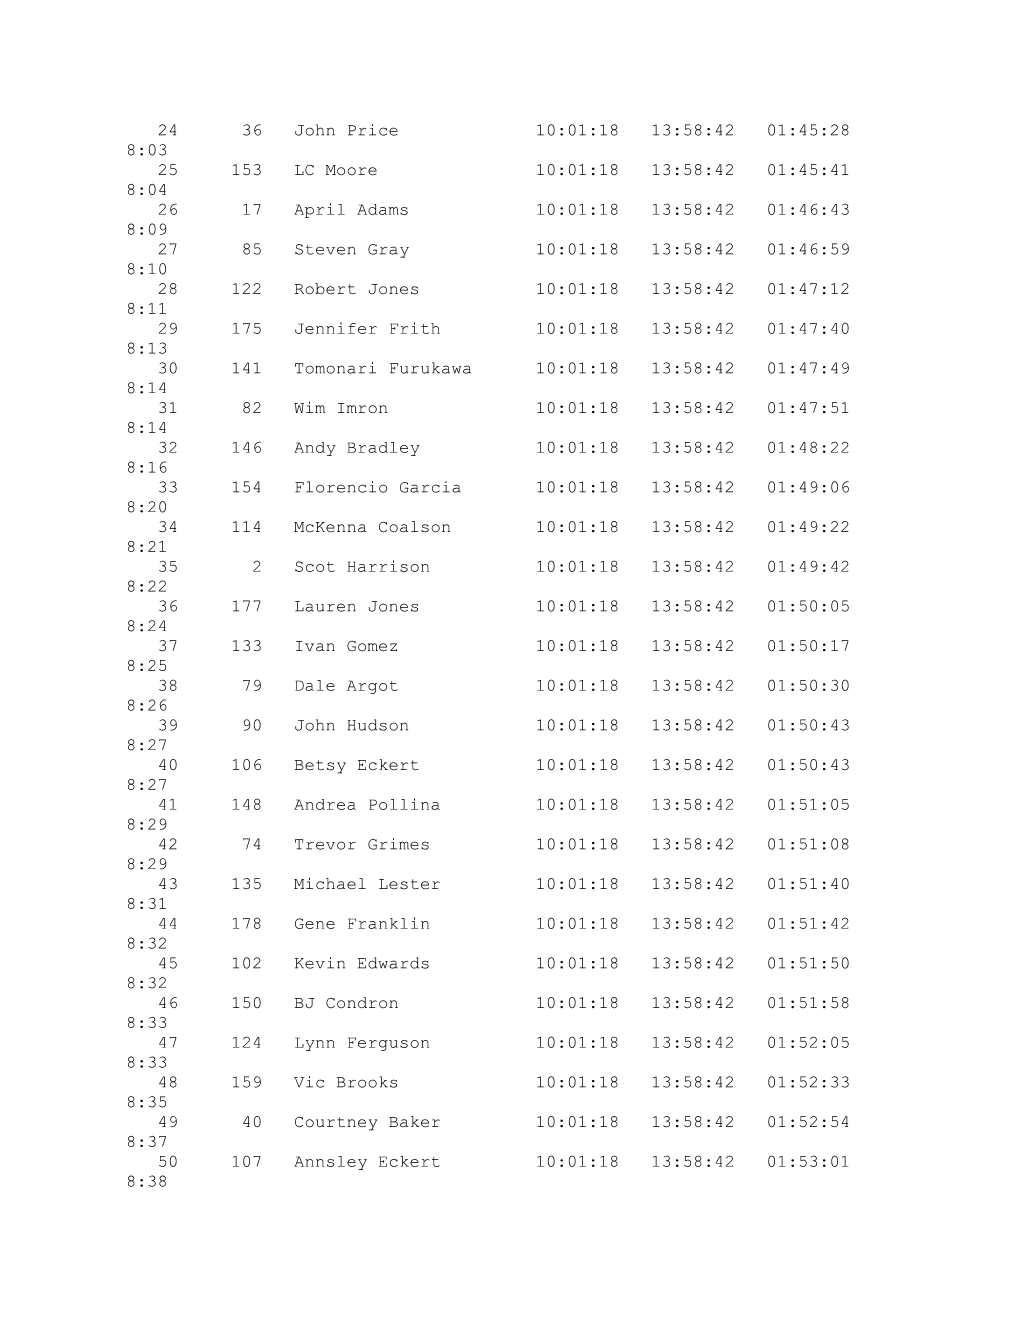 Overall Race Results by Division: Half As of 10/27/2012 1:32:39 PM